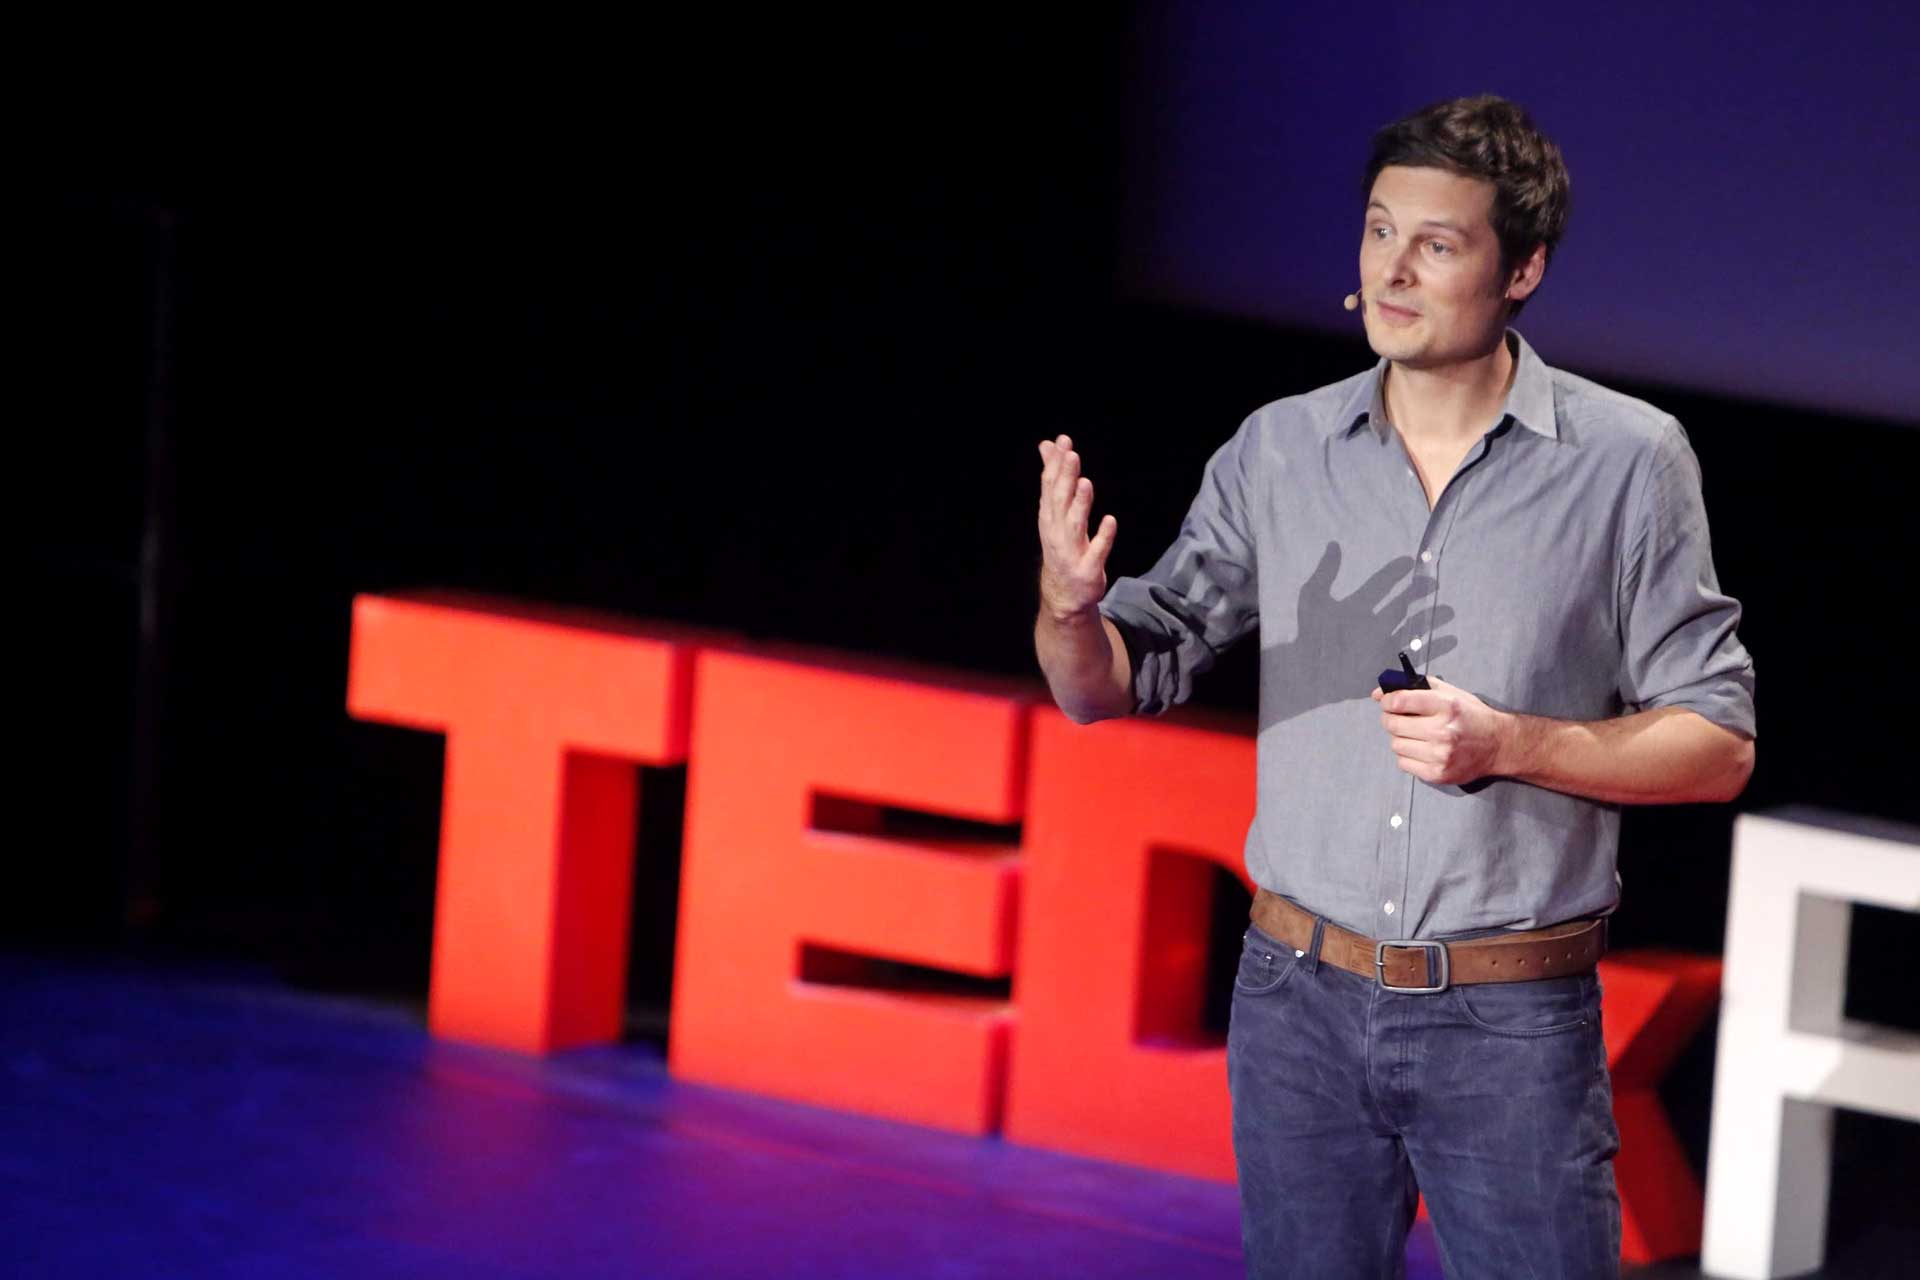 conference-TEDxParis-2013-16.jpg